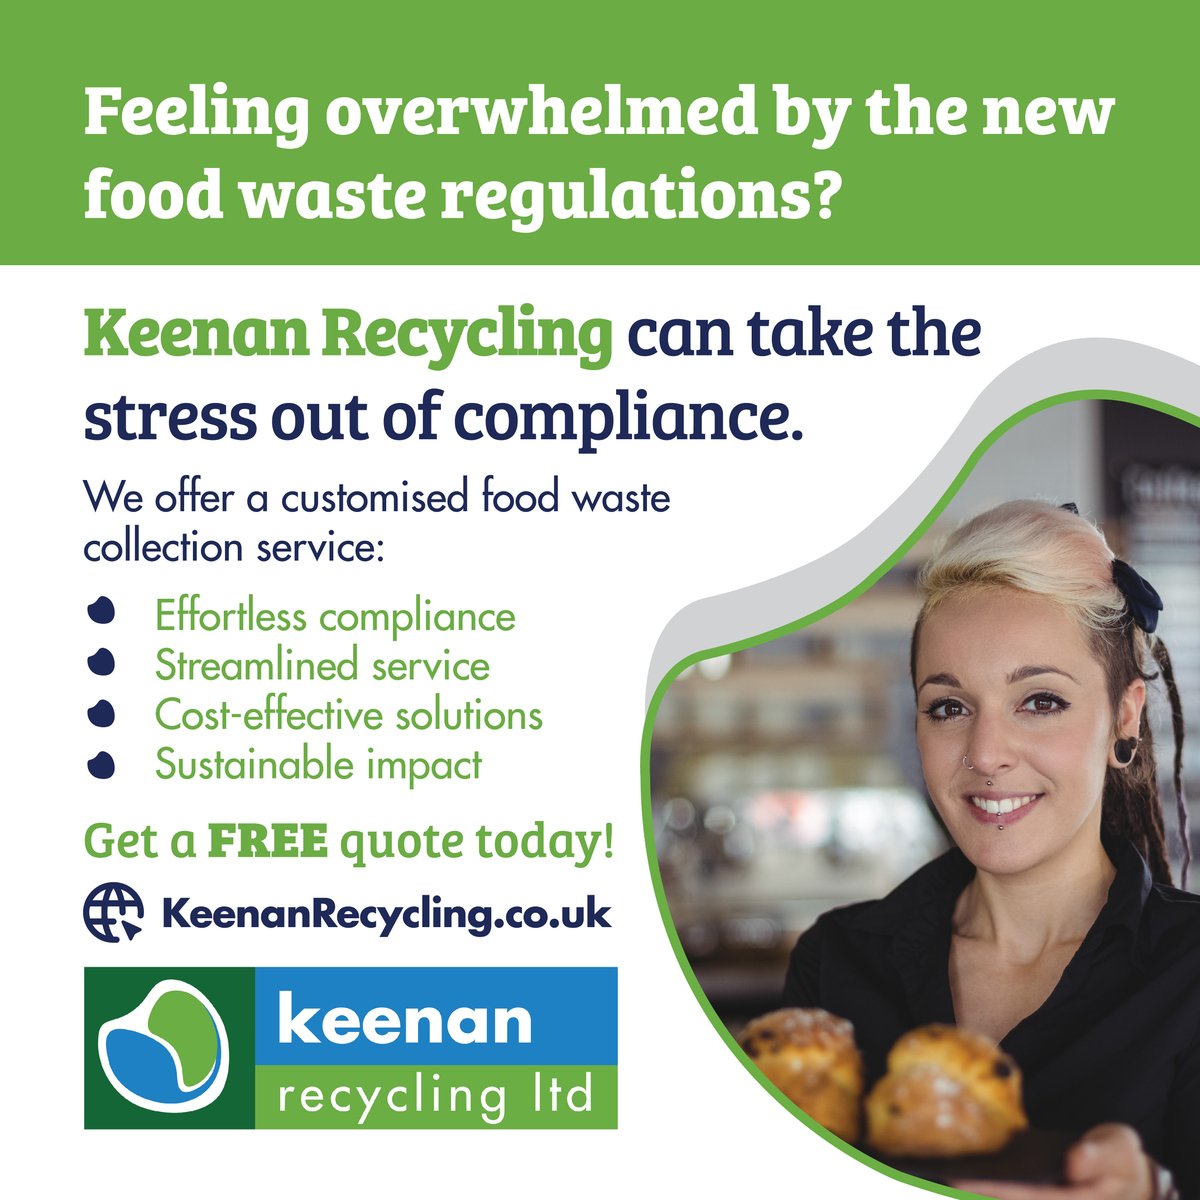 Our member @keenanrecycling is offering a user-friendly food waste recycling service specifically designed for businesses. Contact their team for more details and a free quote: keenanrecycling.co.uk/contact-us/